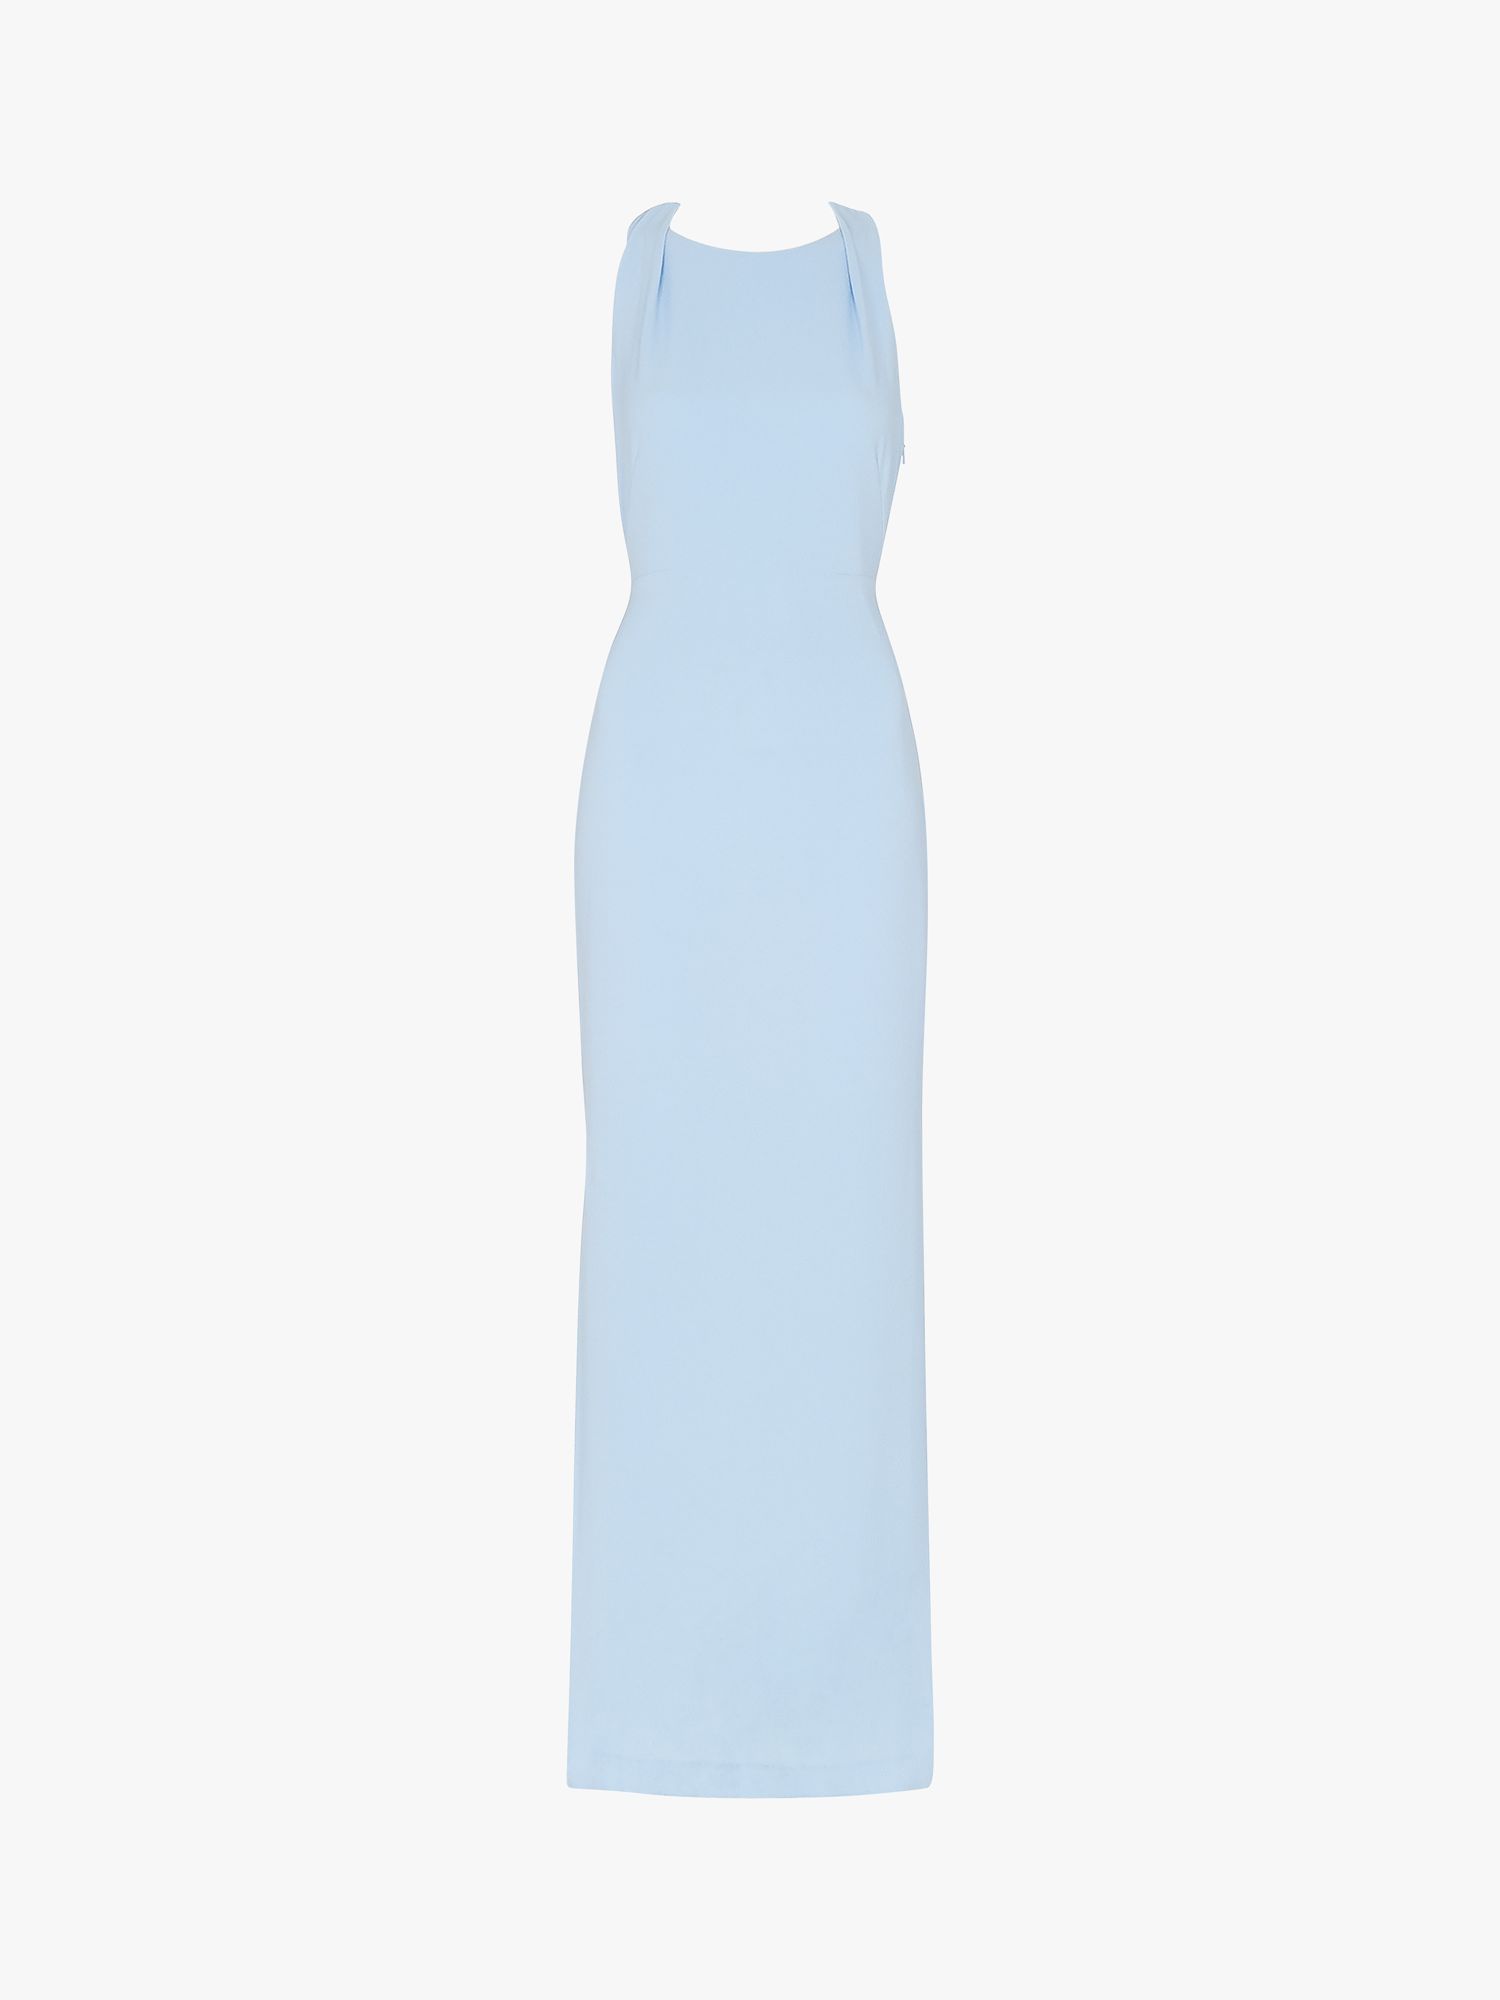 Buy Whistles Tie Back Maxi Dress Online at johnlewis.com